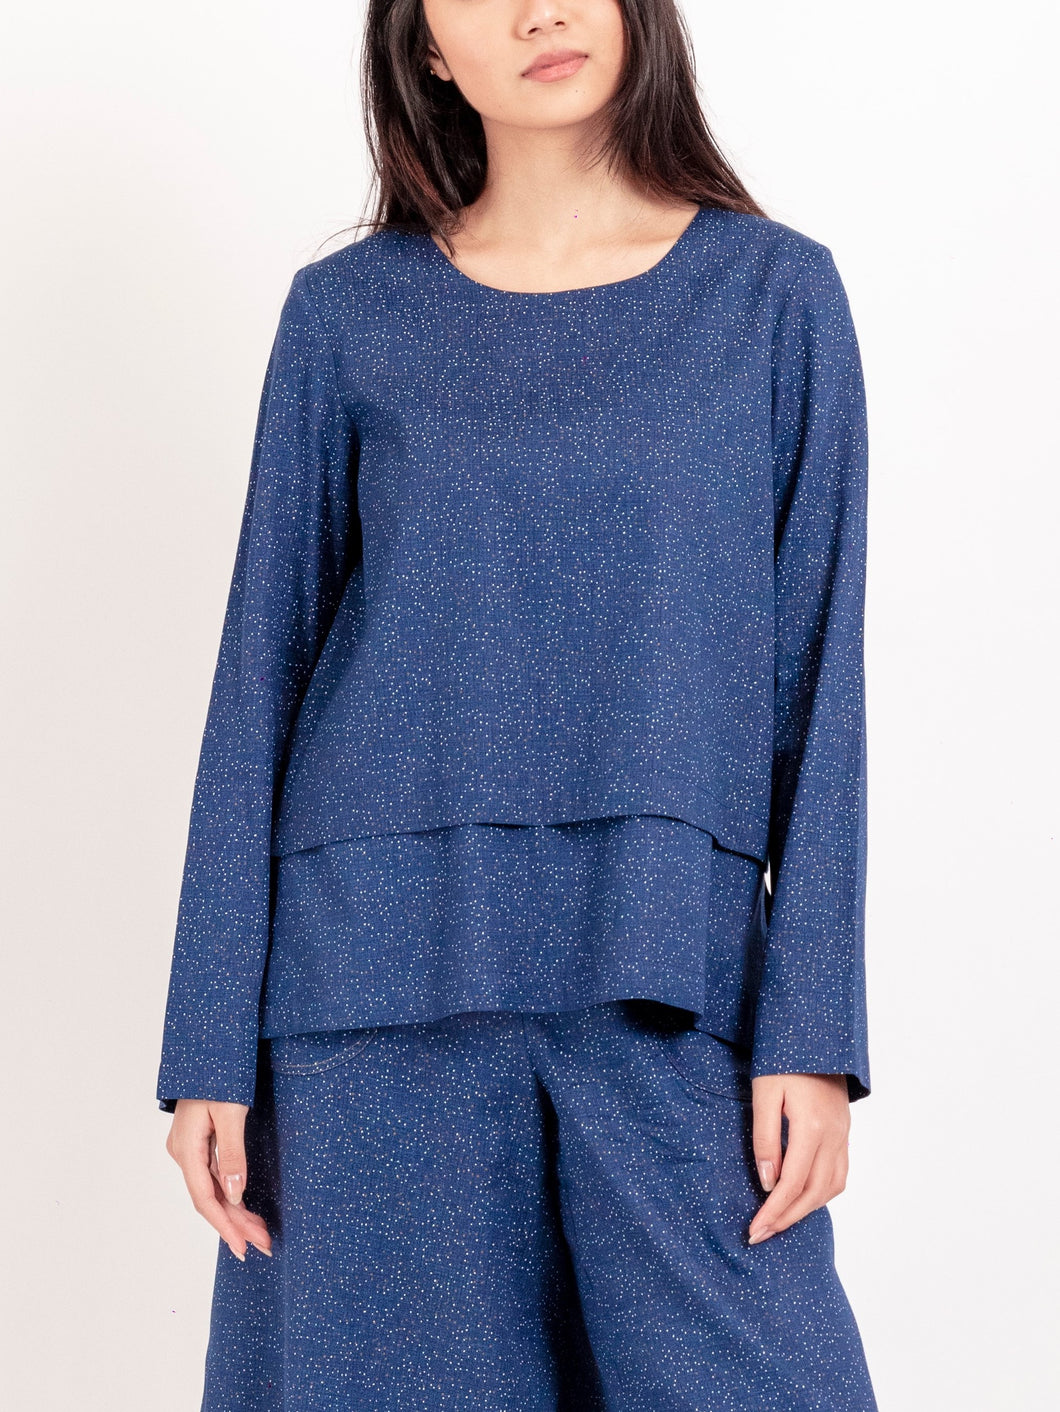 Marine Blue Double Layer Top